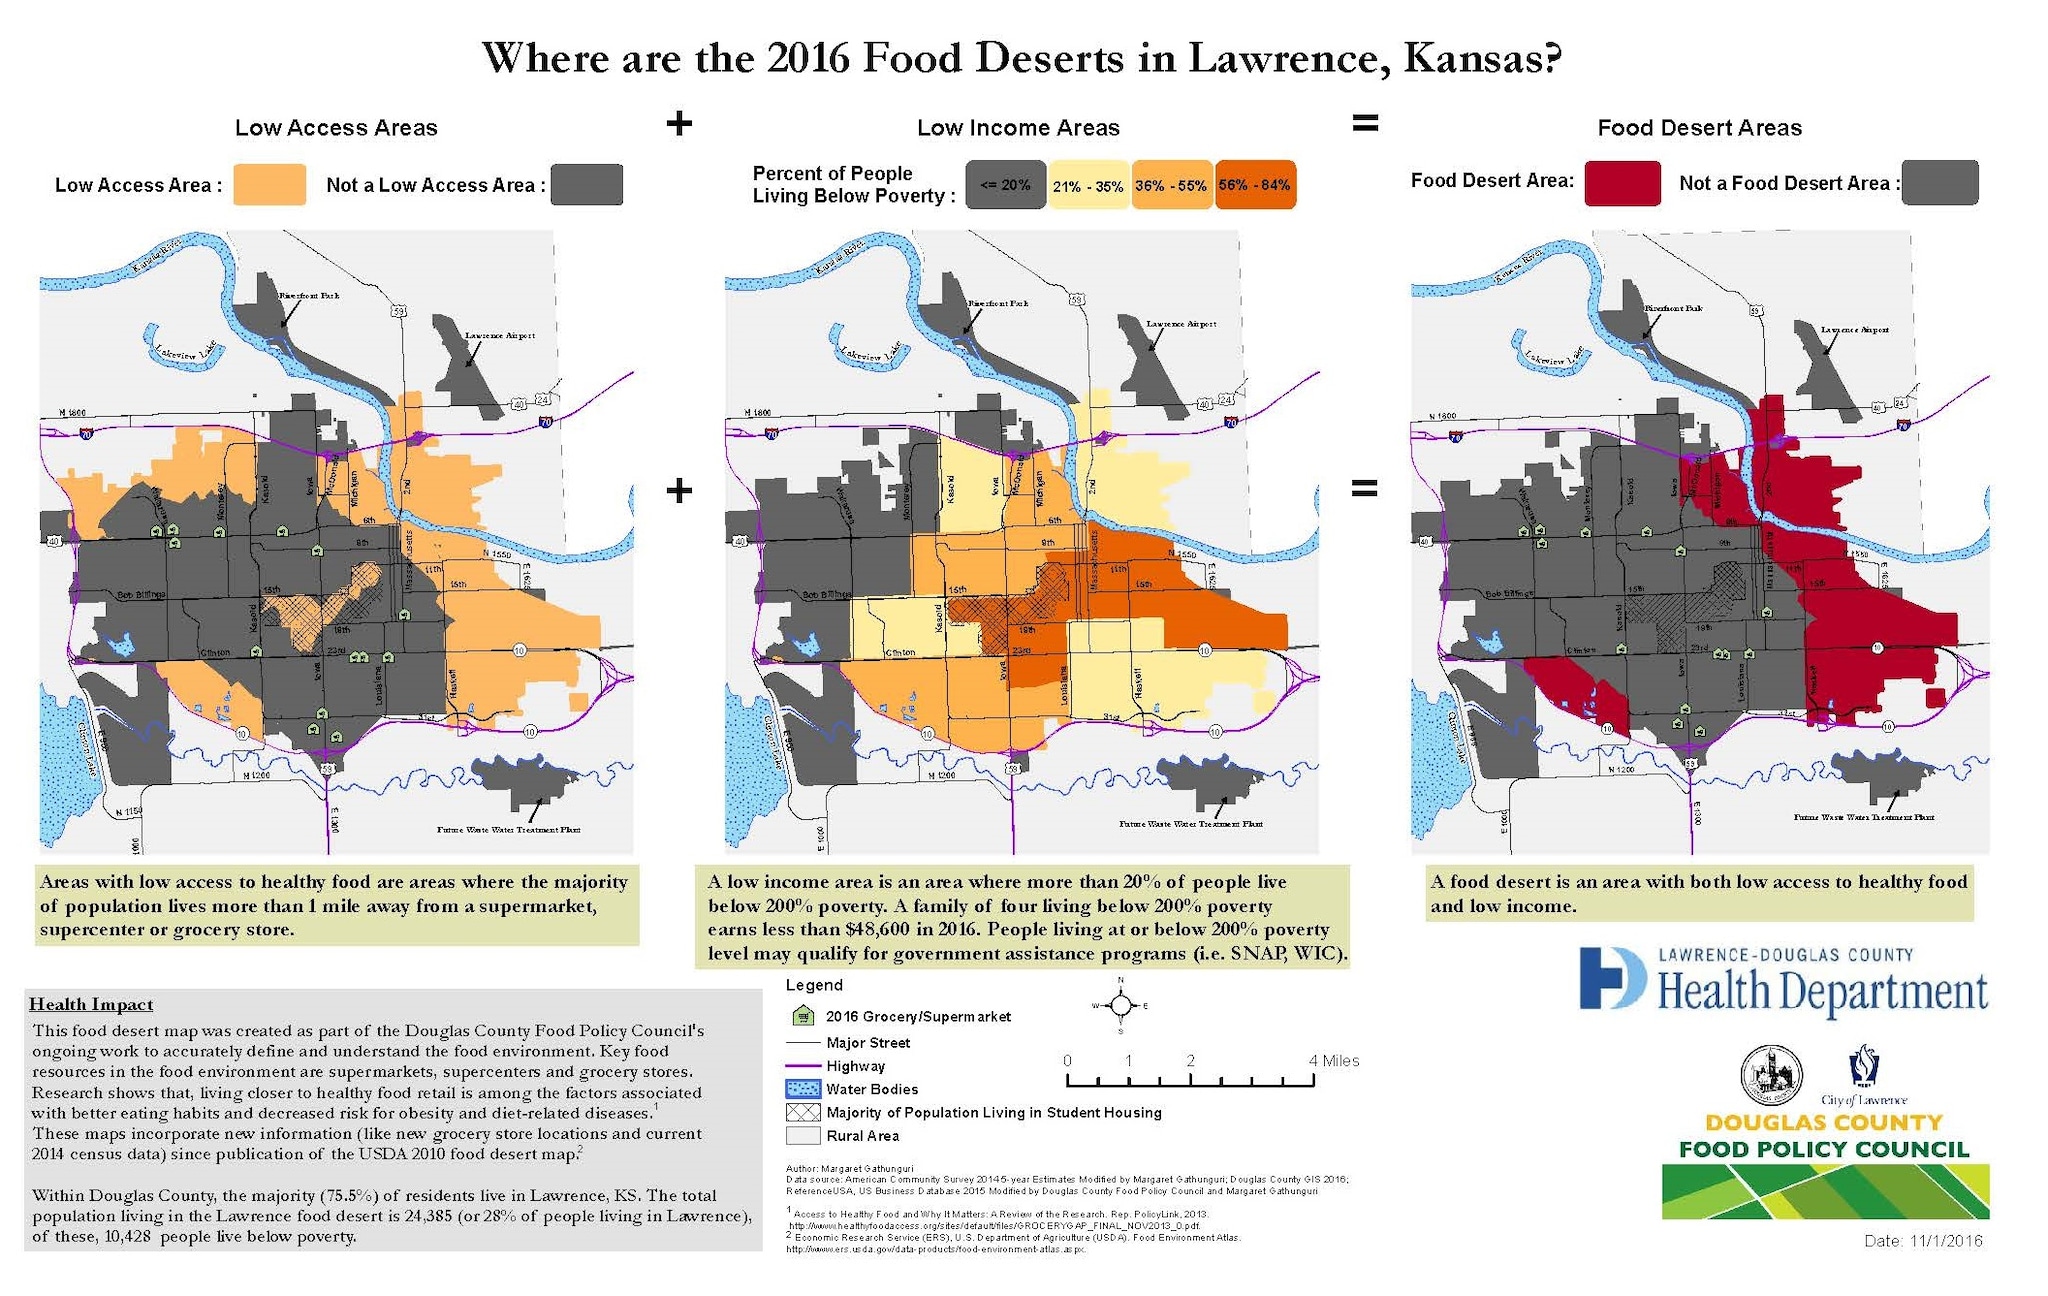 The map series shows the factors that contribute to a food desert: low access to healthy foods and low income. Using 2014 Census data, 28% of people living in Lawrence, KS live within a food desert. Many in Lawrence who experience low income and/or low access are concentrated in East Lawrence, although southwest Lawrence also qualifies as a food desert.